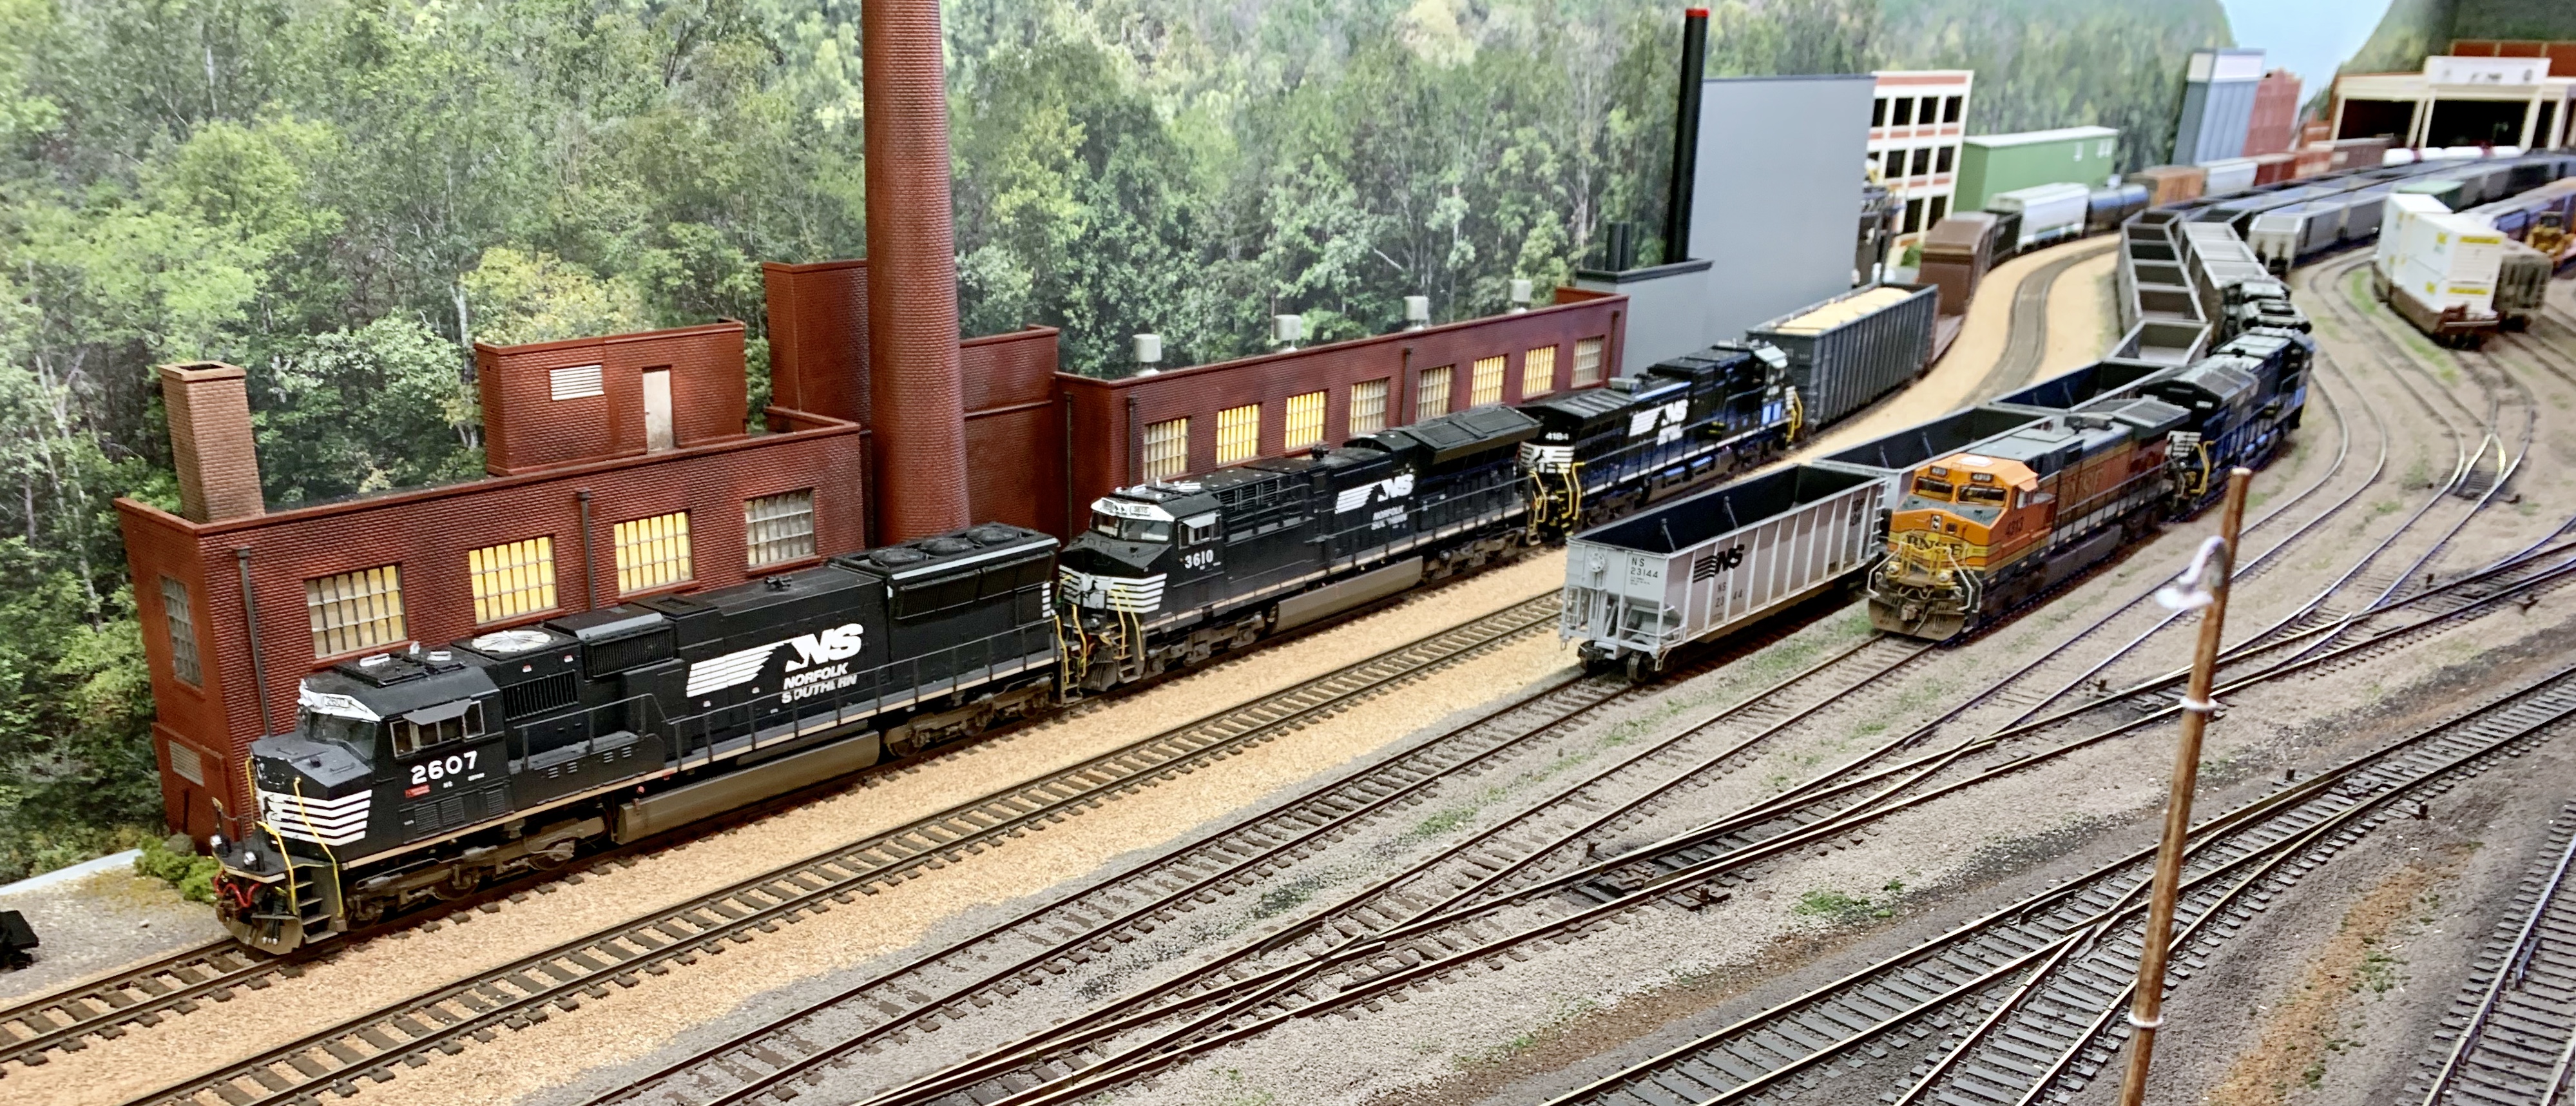 Model Railroading: Where to Beginarticle featured image thumbnail.